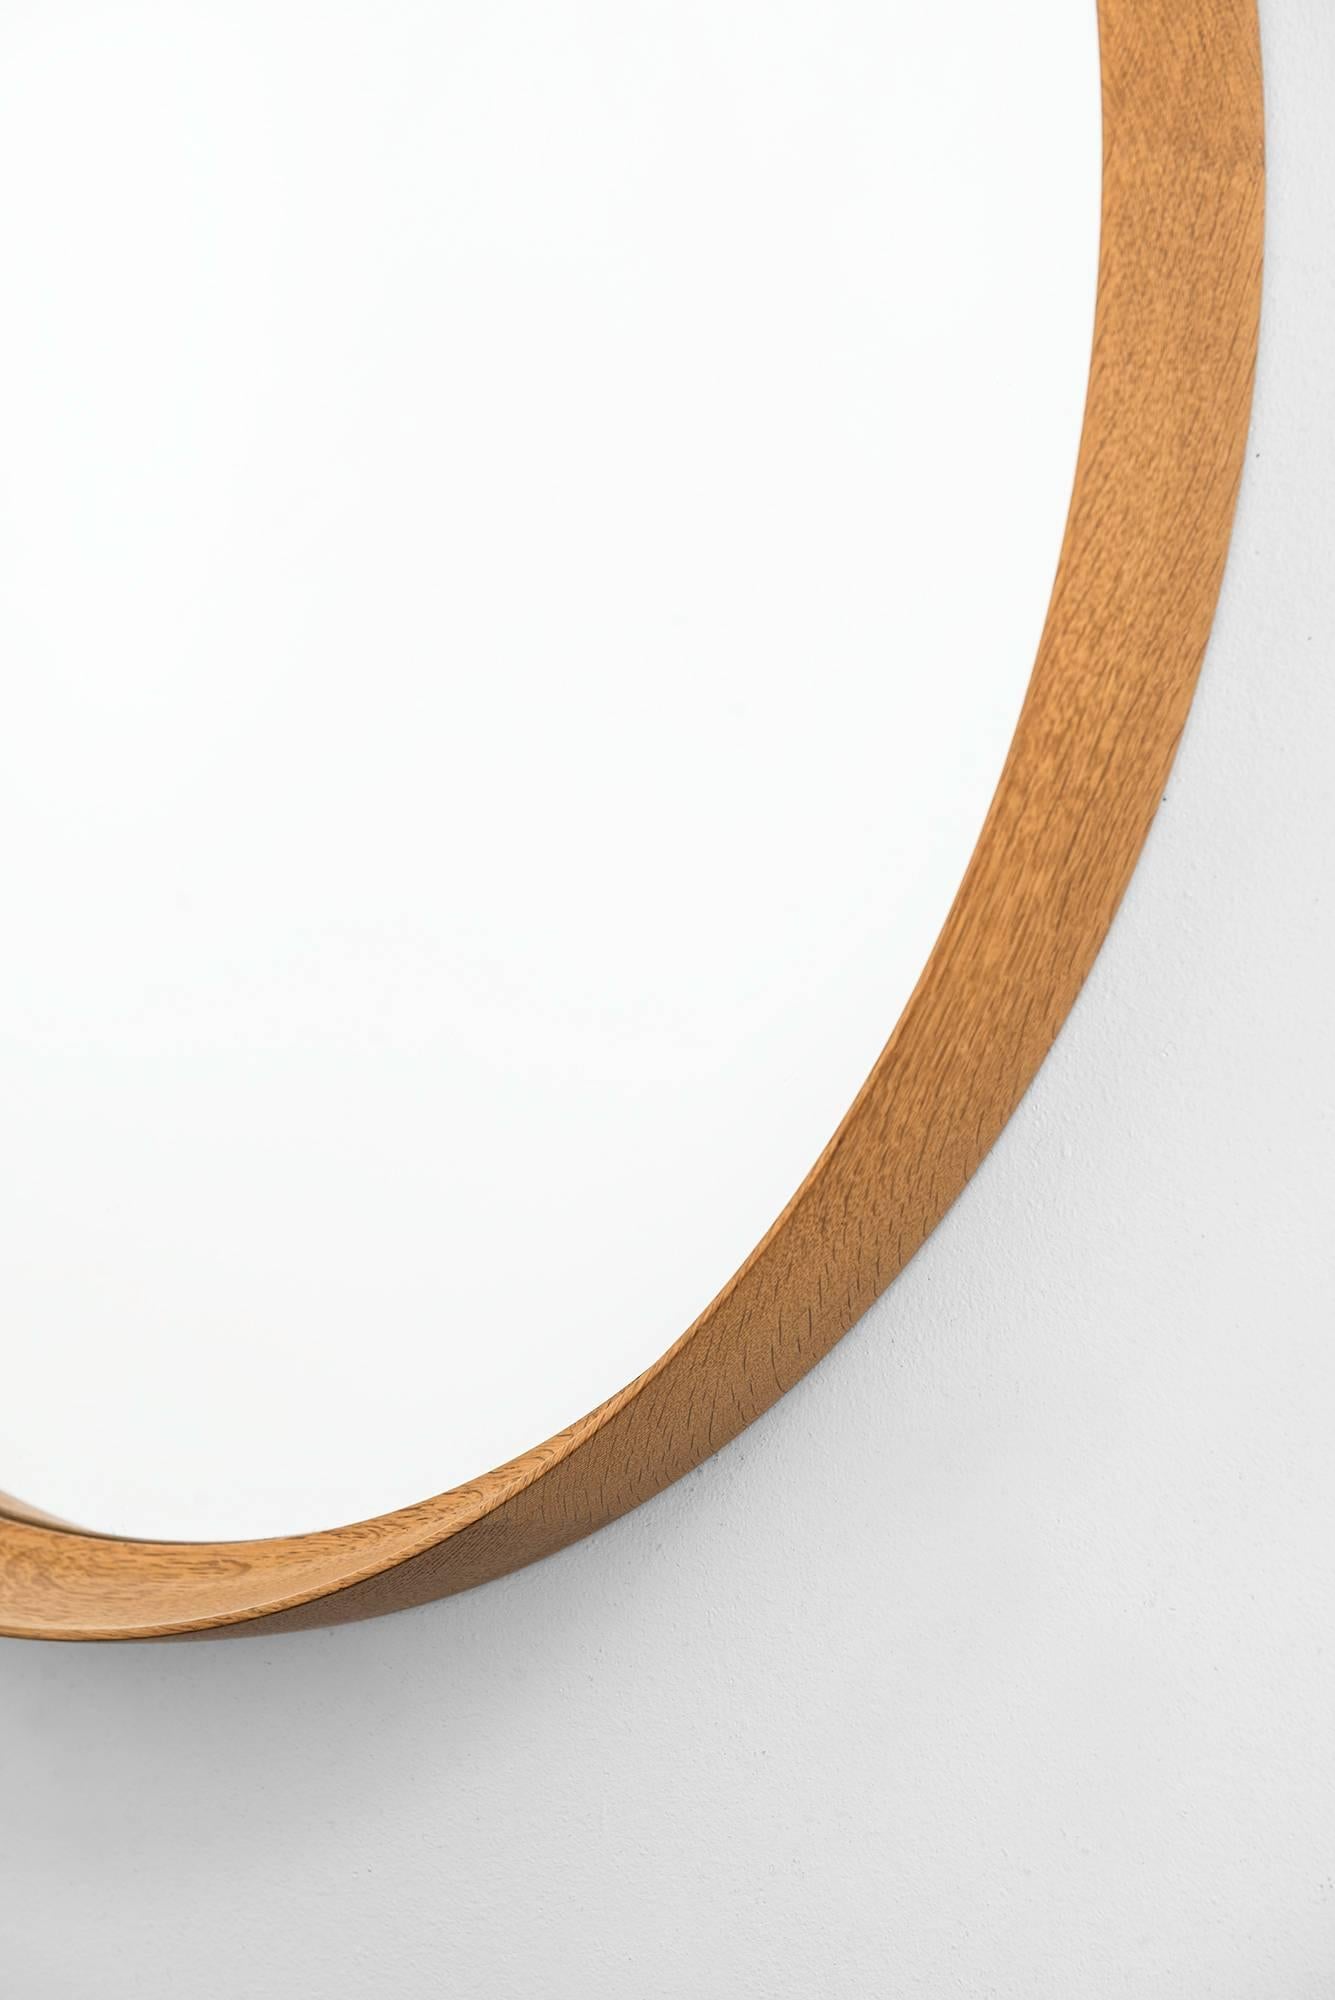 Rare and large mirror in oak designed by Uno & Östen Kristiansson. Produced by Luxus in Vittsjö, Sweden.